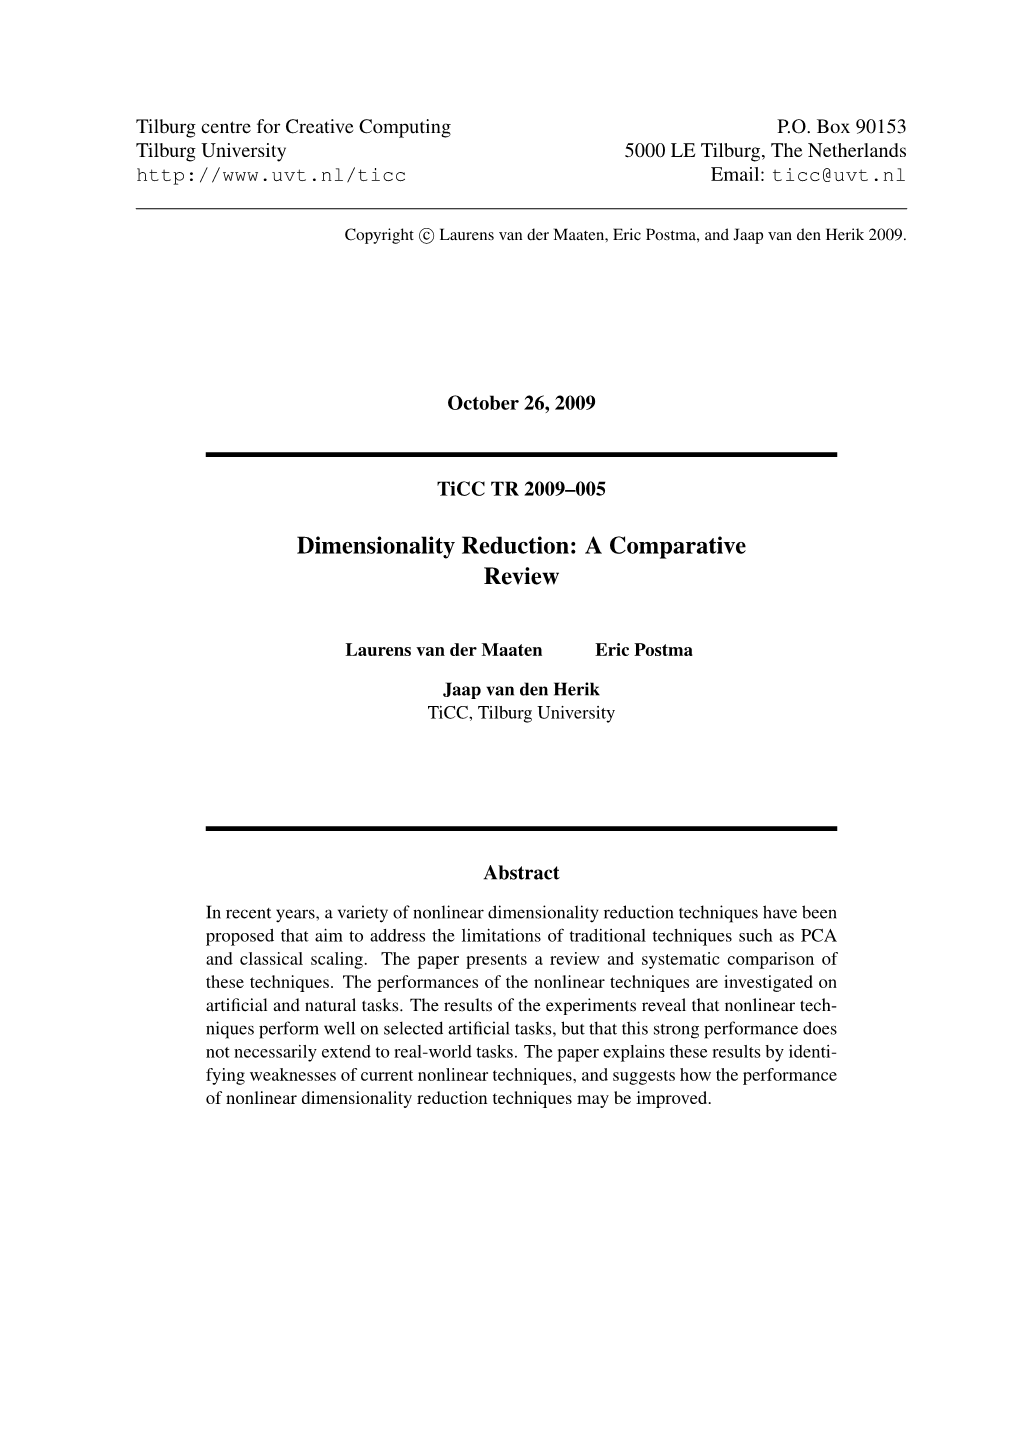 Dimensionality Reduction: a Comparative Review